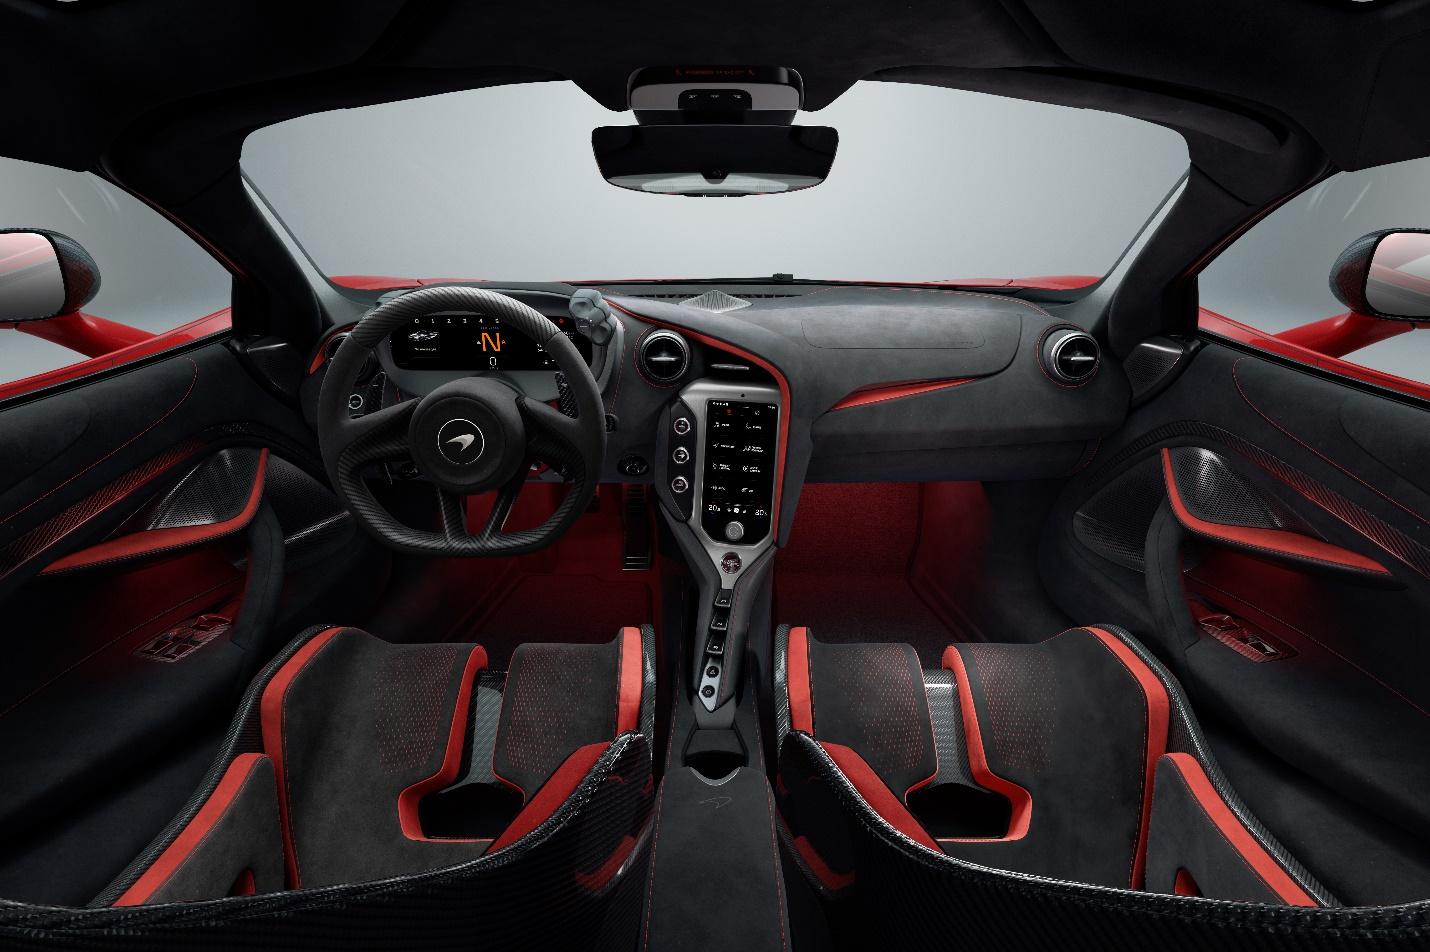 The interior of a car

Description automatically generated